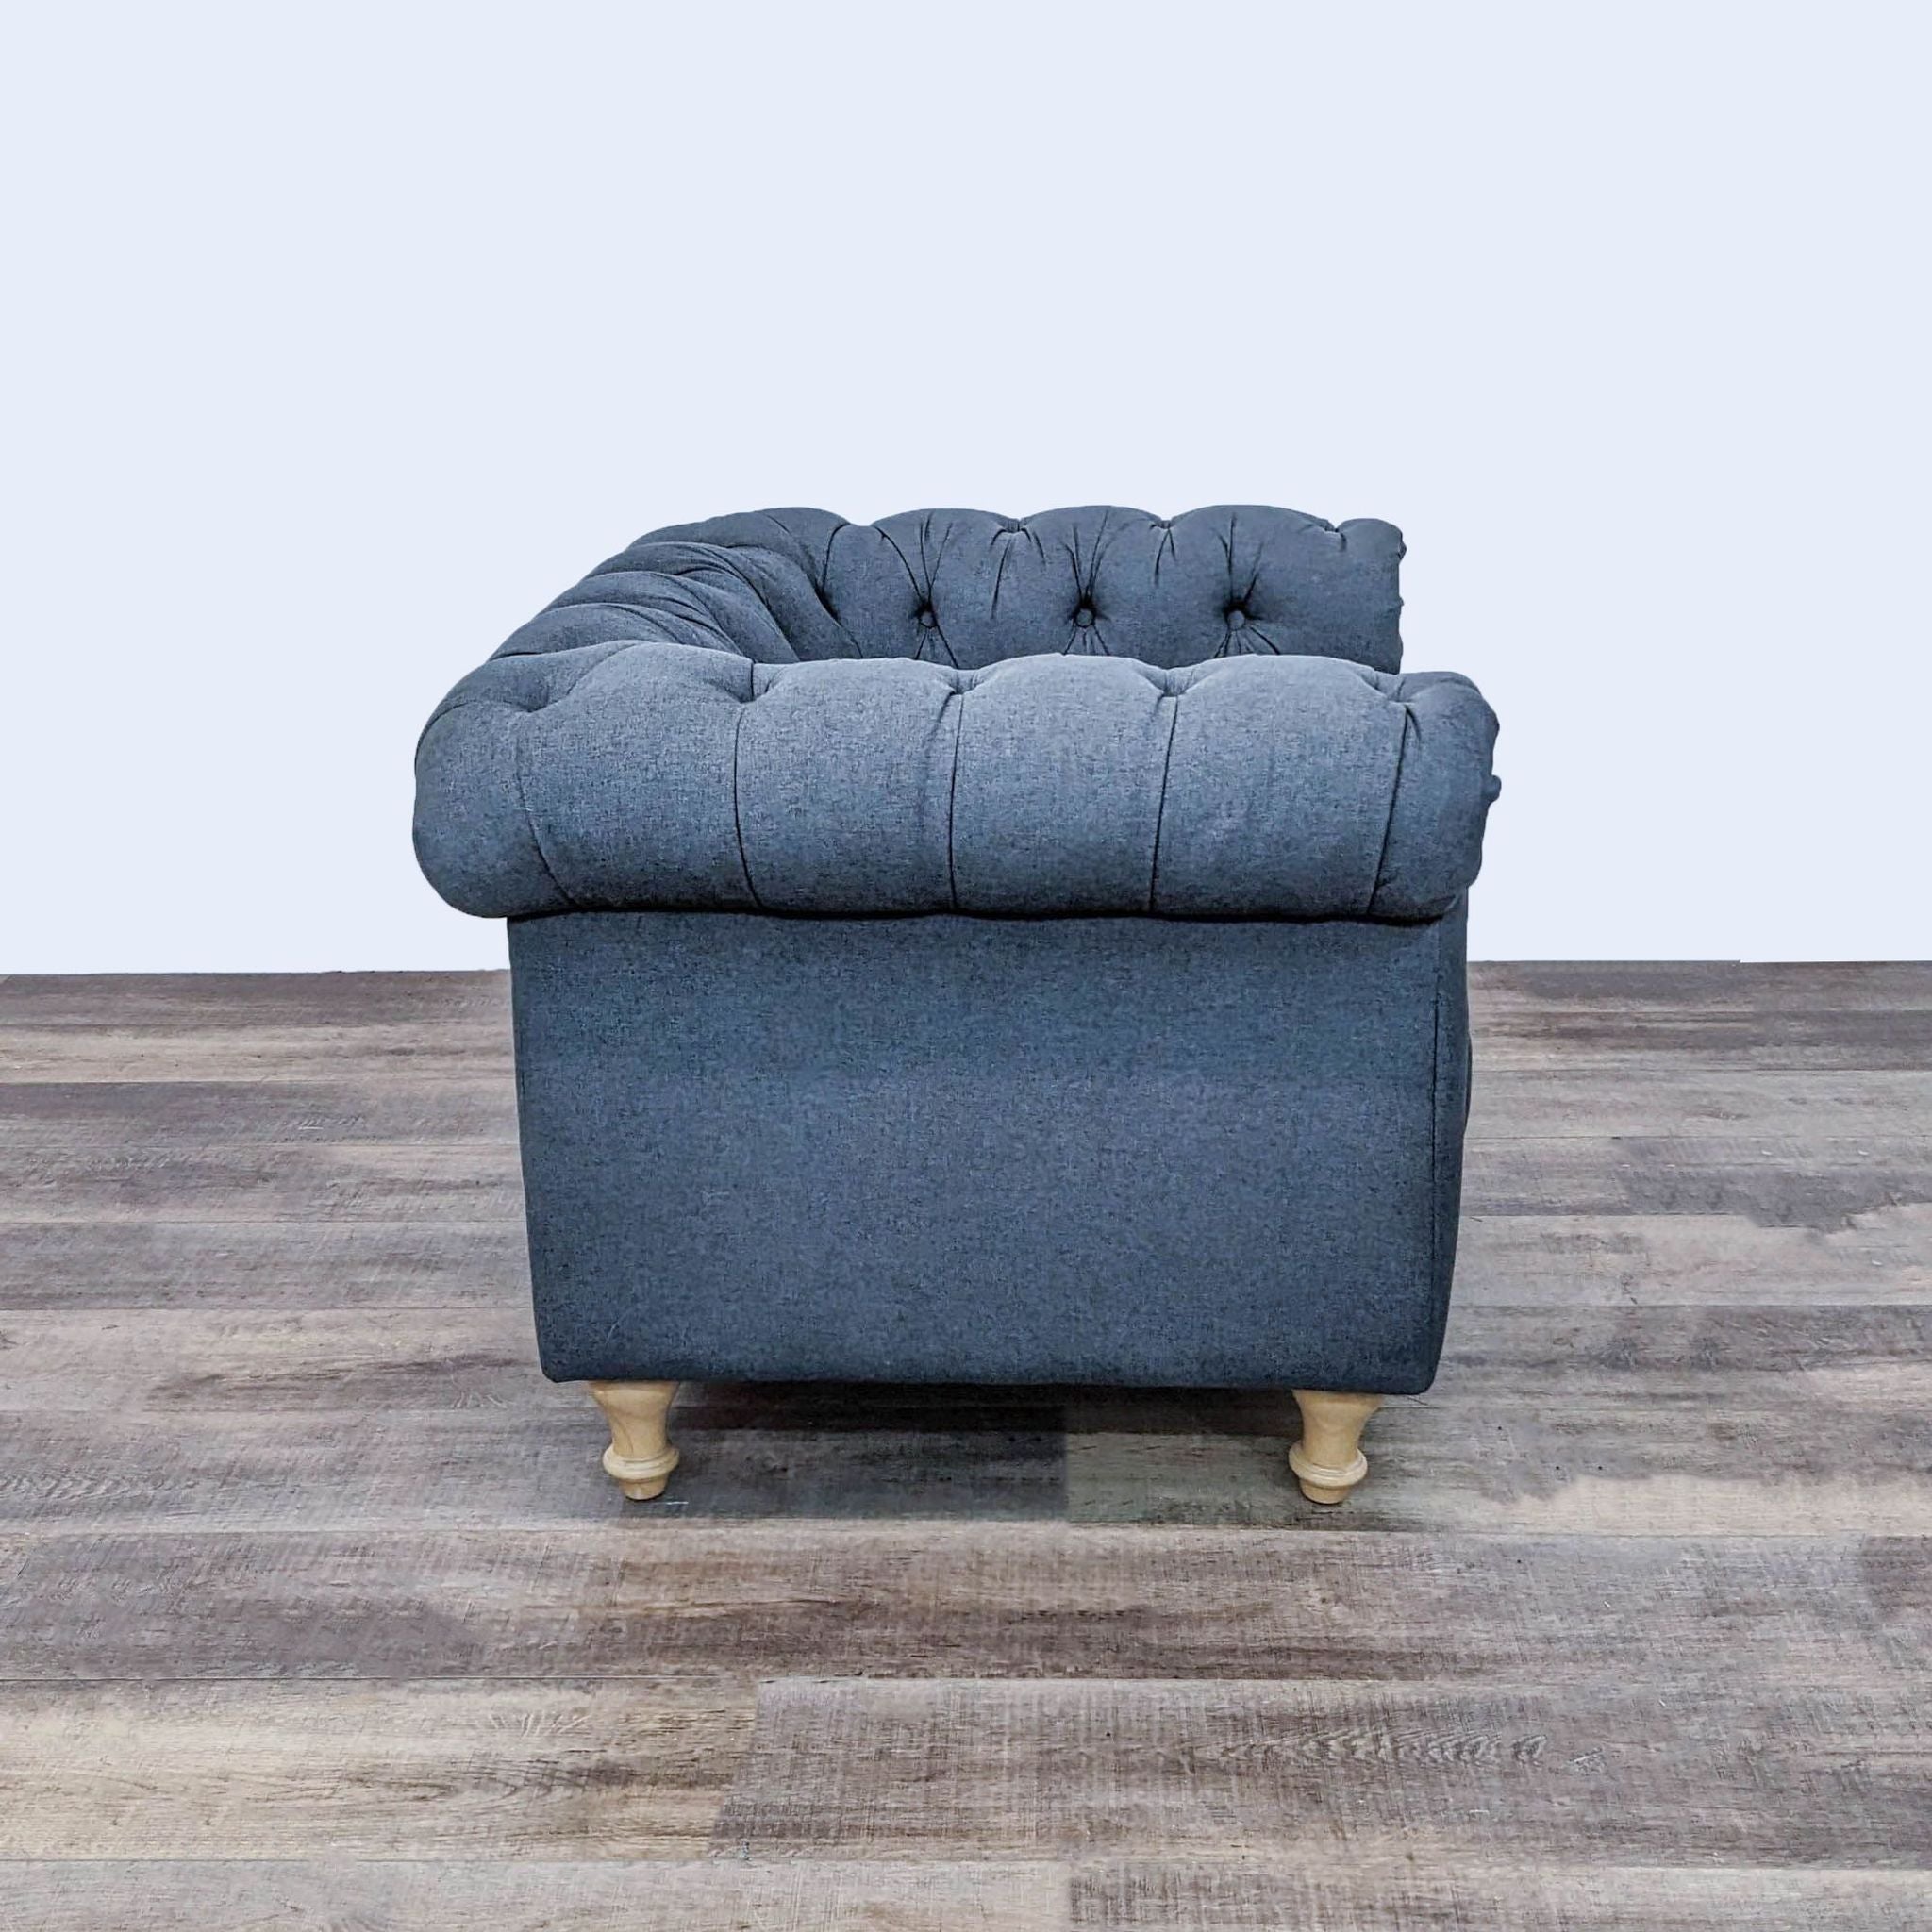 Tufted fabric lounge chair by World Market with rolled arms, displayed from various angles on hardwood floor.